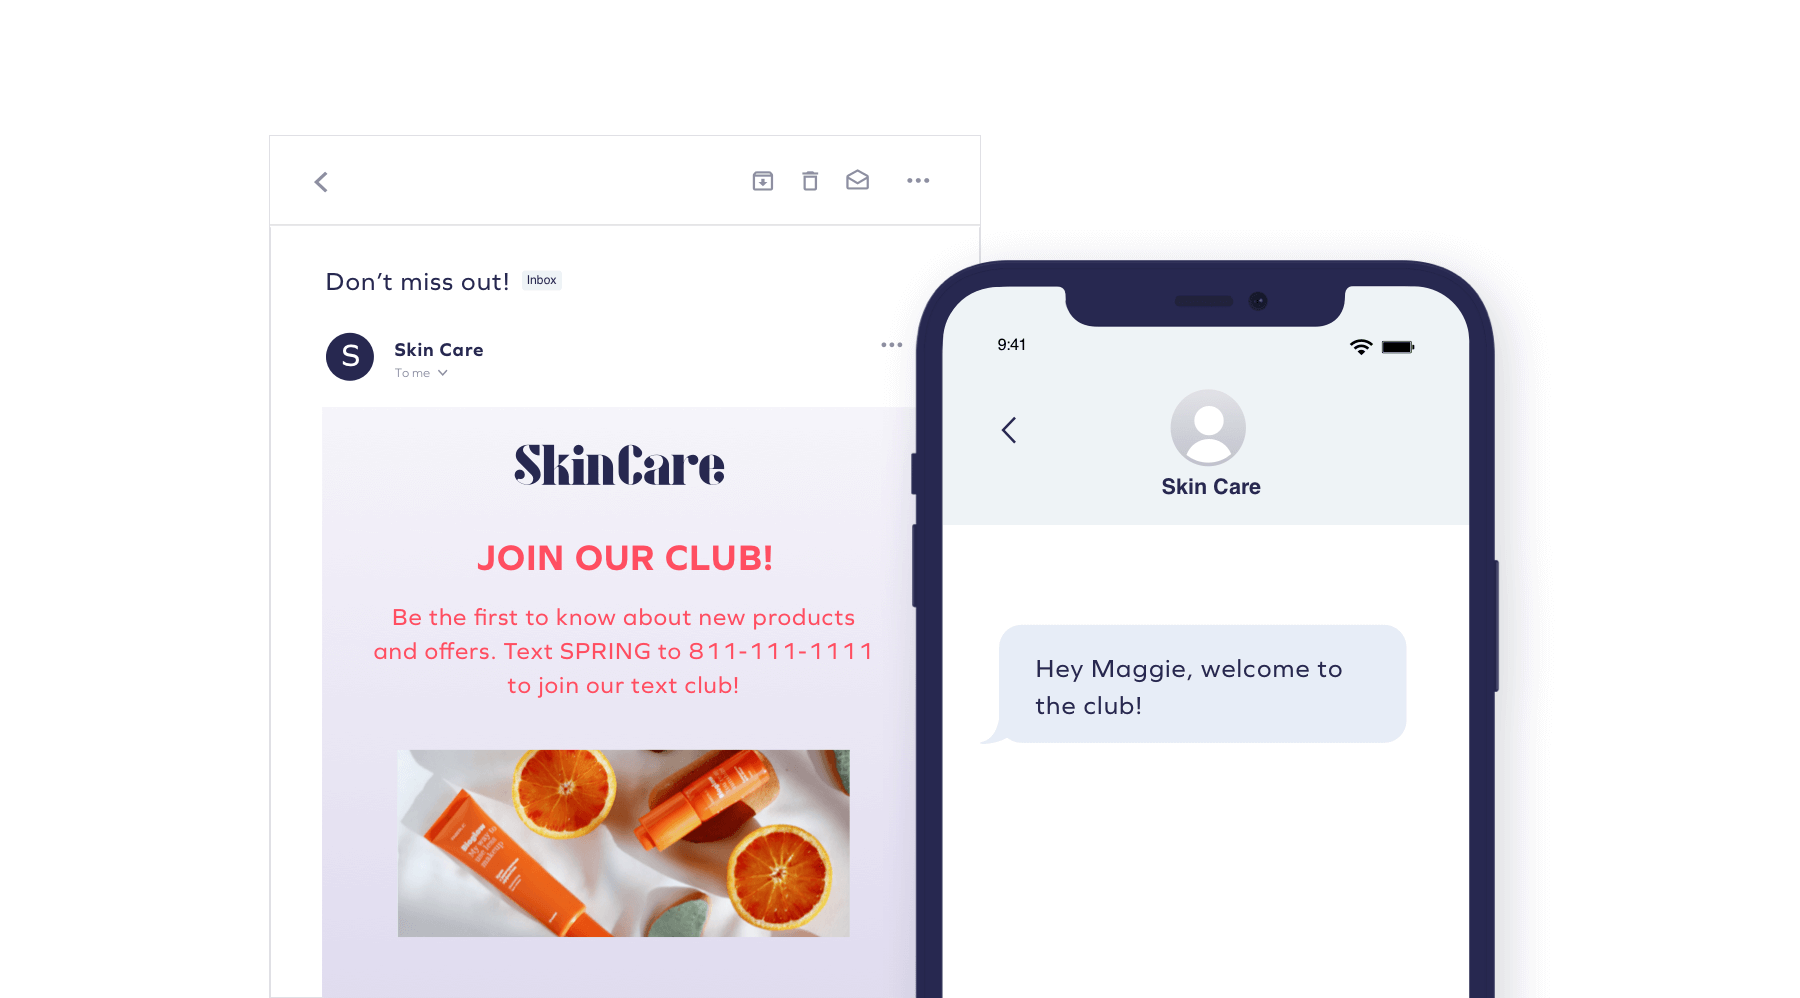 An email and SMS marketing message side by side